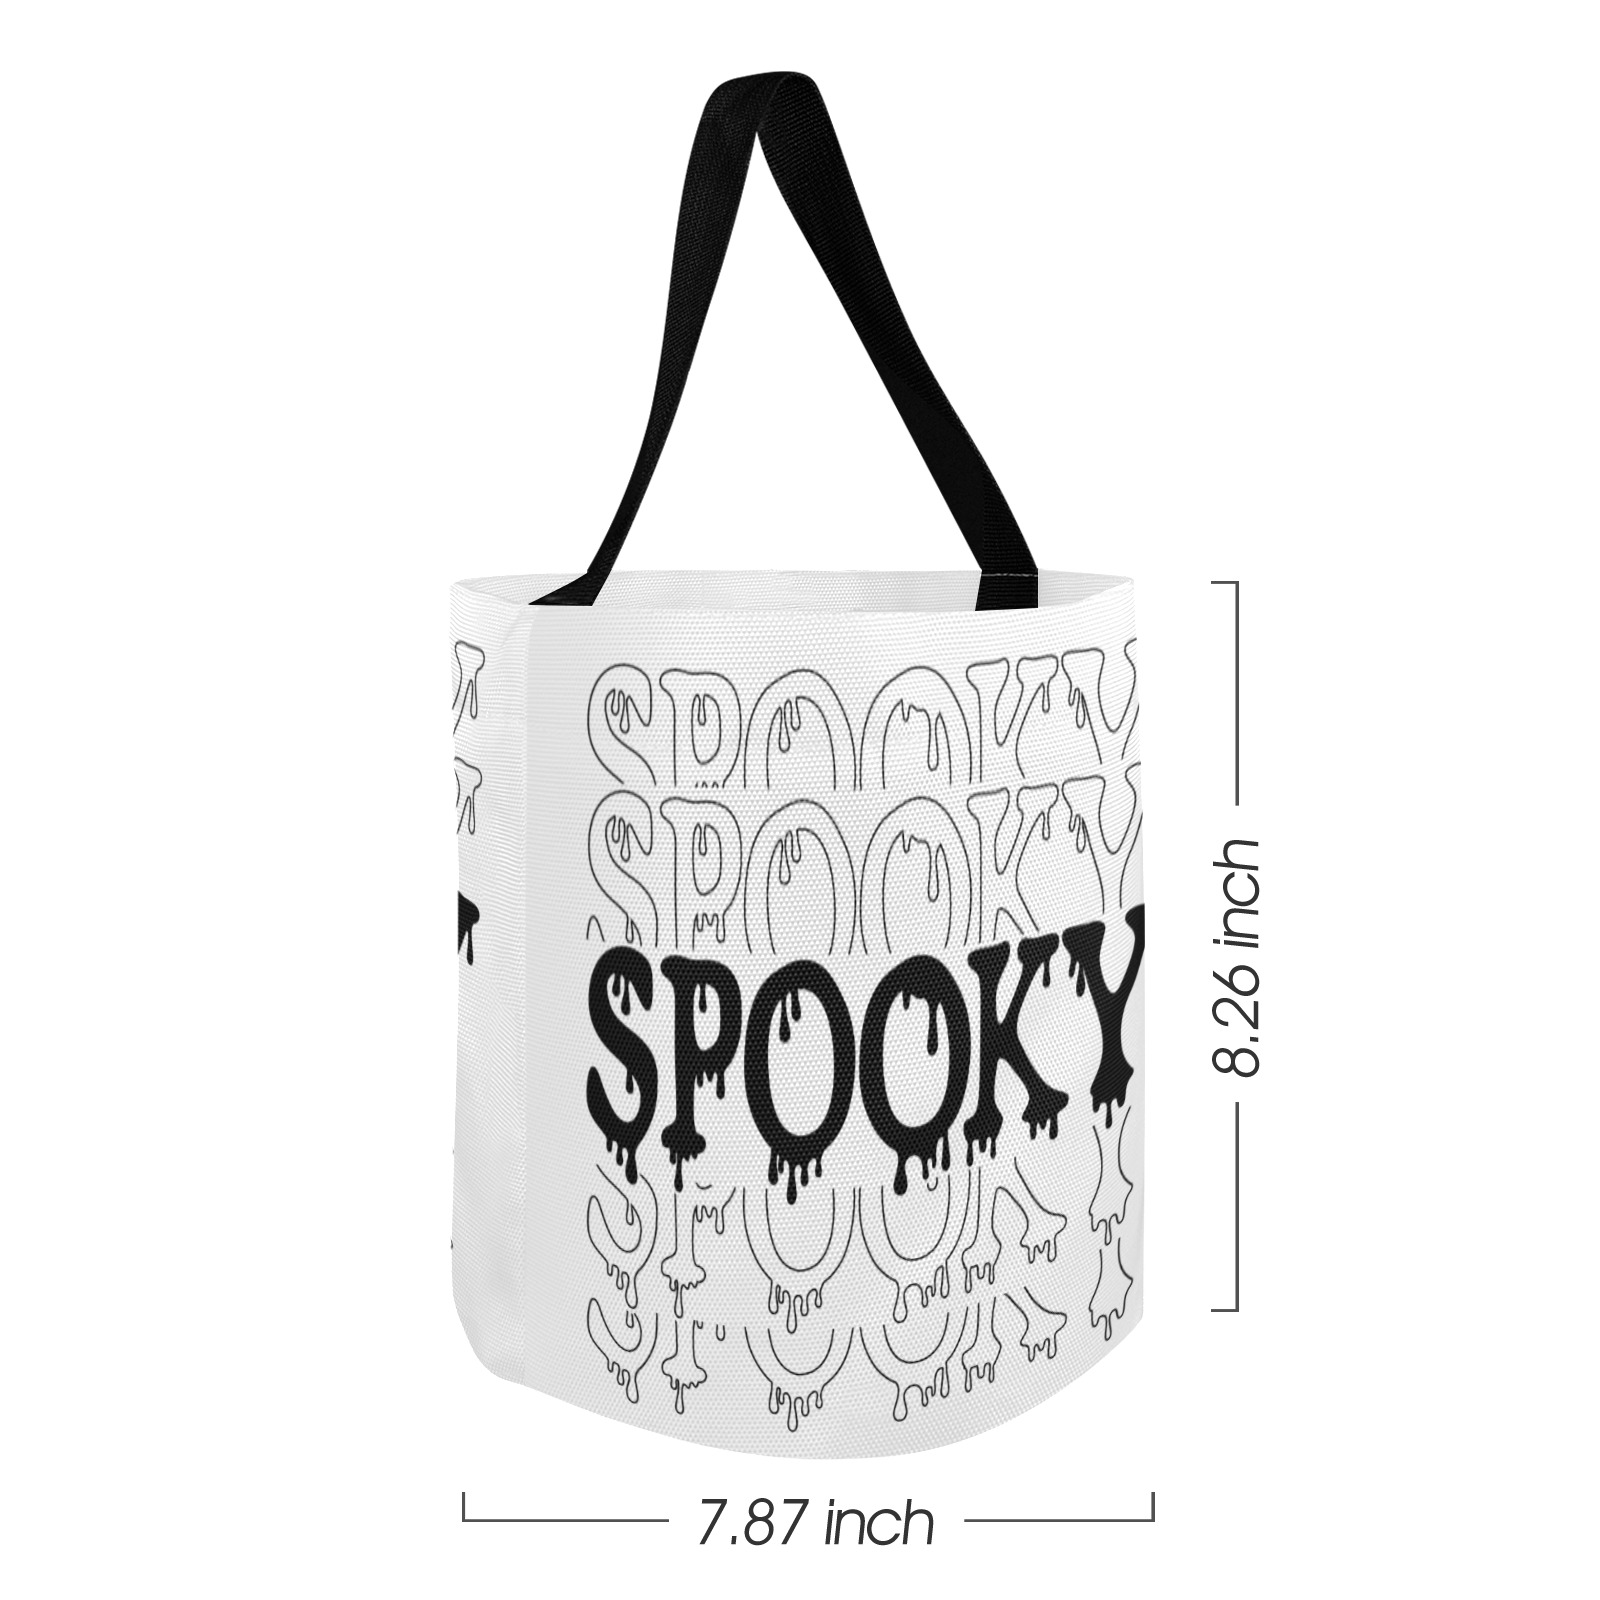 SPOOKY  TRICK OR TREAT BAG Halloween Candy Bag